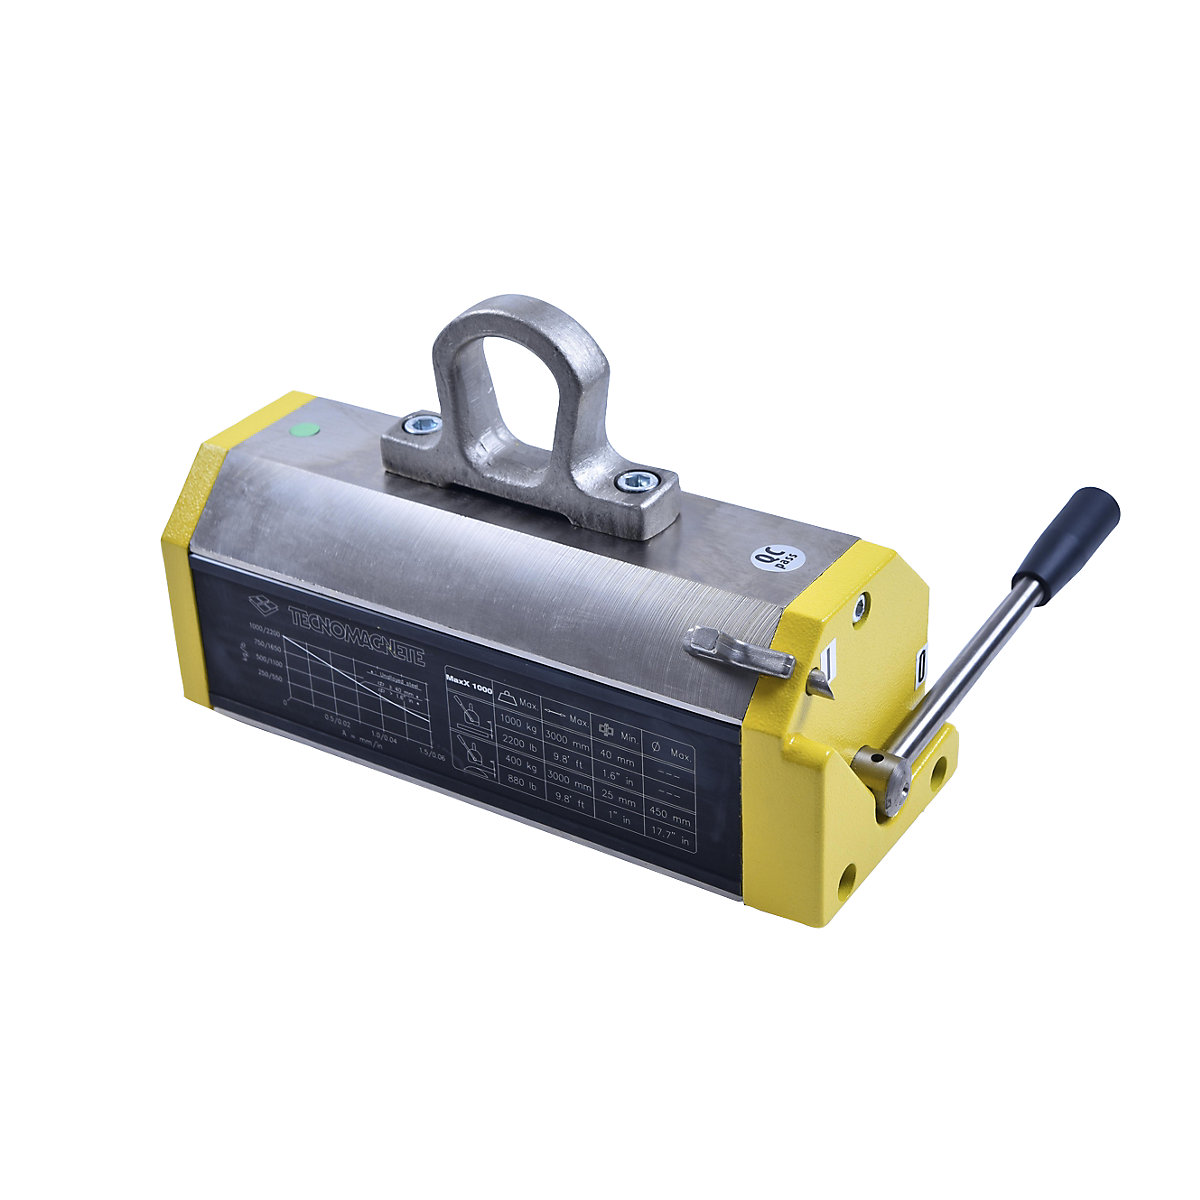 Stationary lifting magnet, for flat and round material, lifting capacity 1000 kg for flat material, 400 kg for round material-1